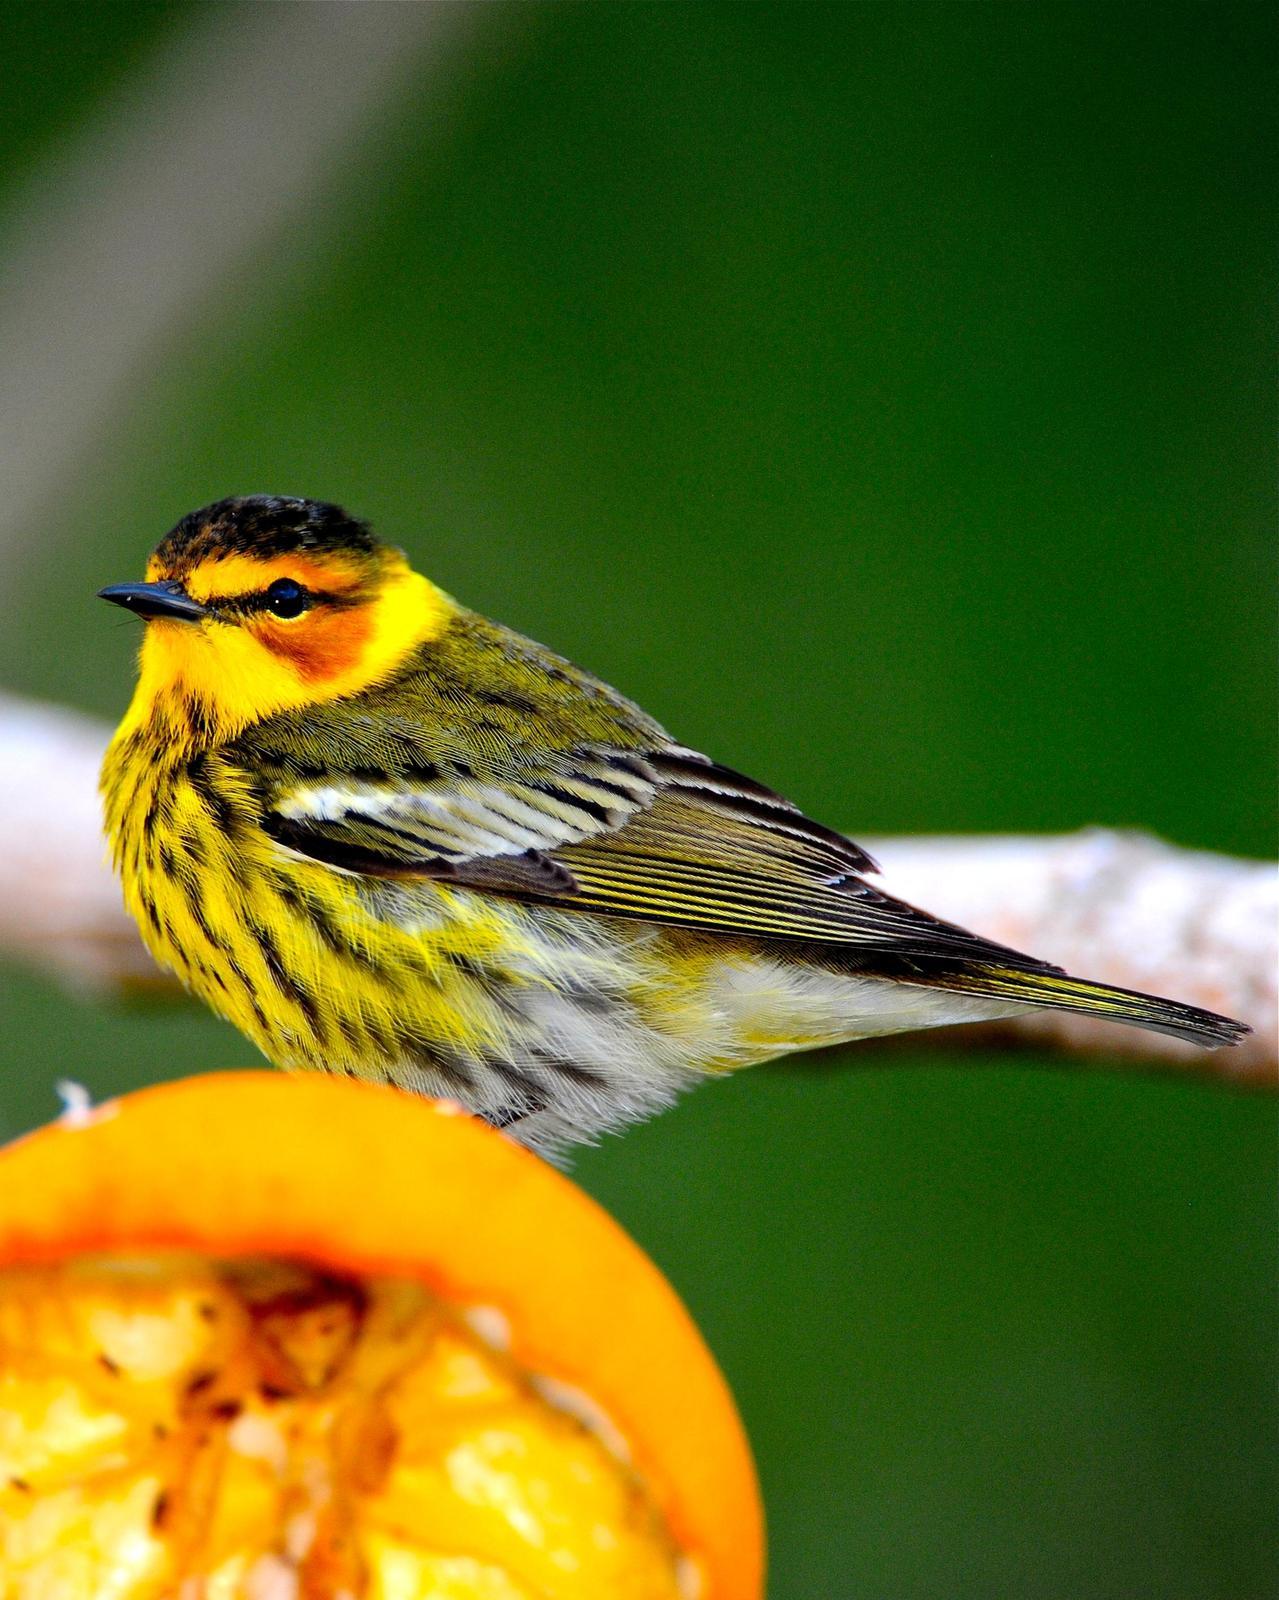 Cape May Warbler Photo by Gerald Friesen